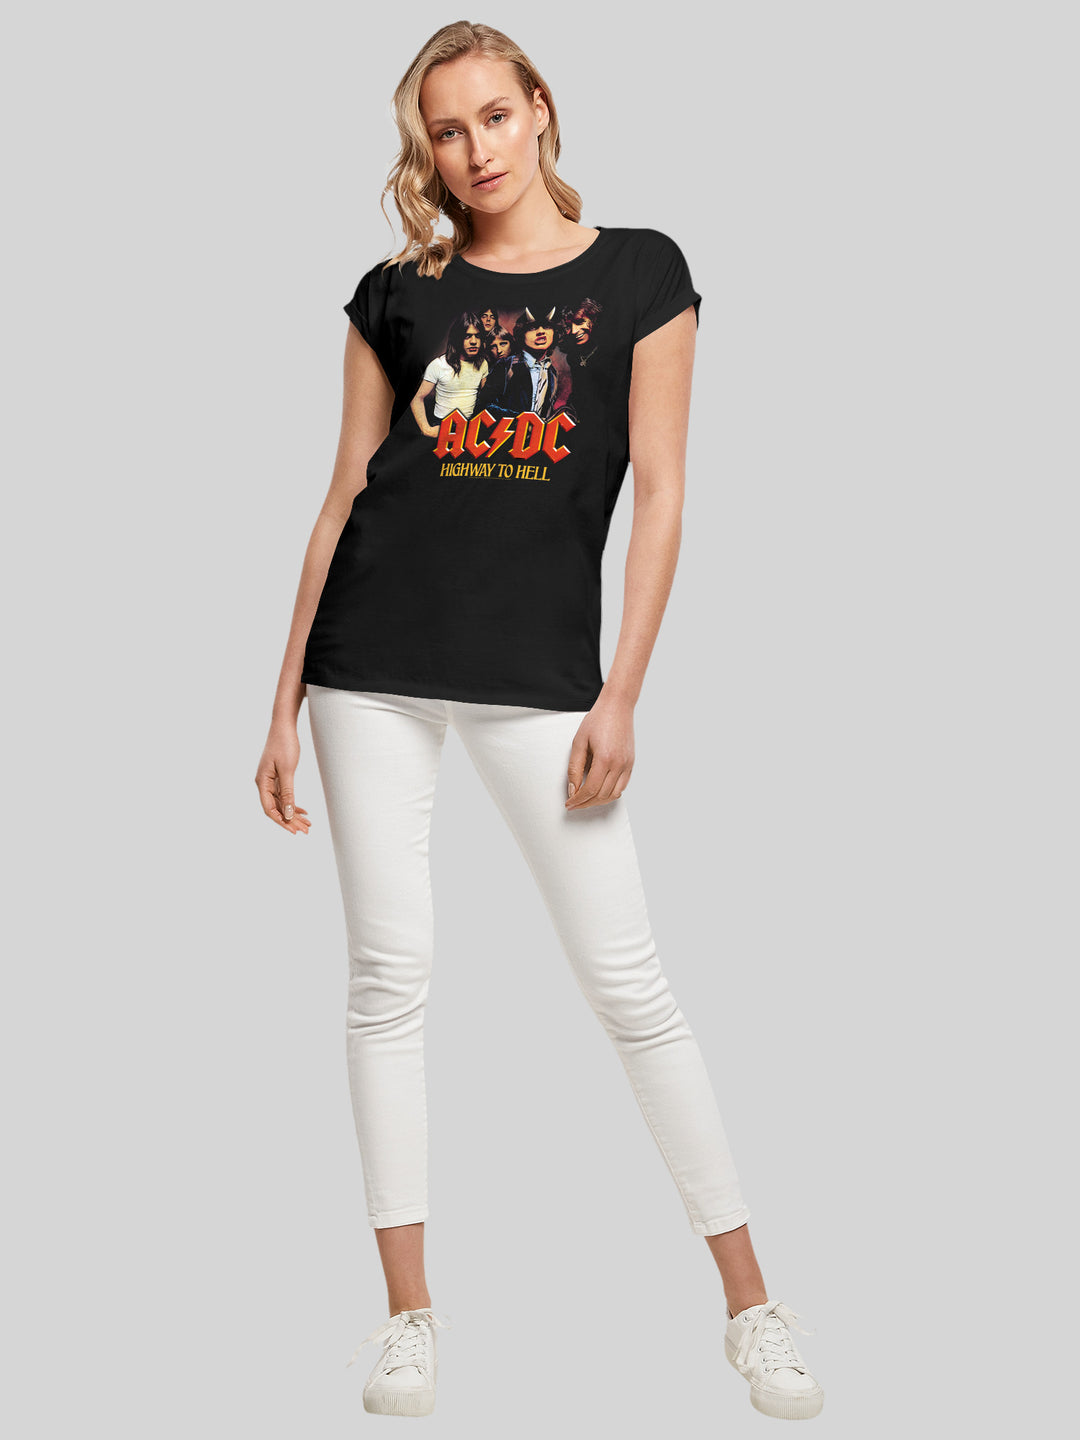 ACDC T-Shirt | Highway To Hell Group | Premium Short Sleeve Ladies Tee